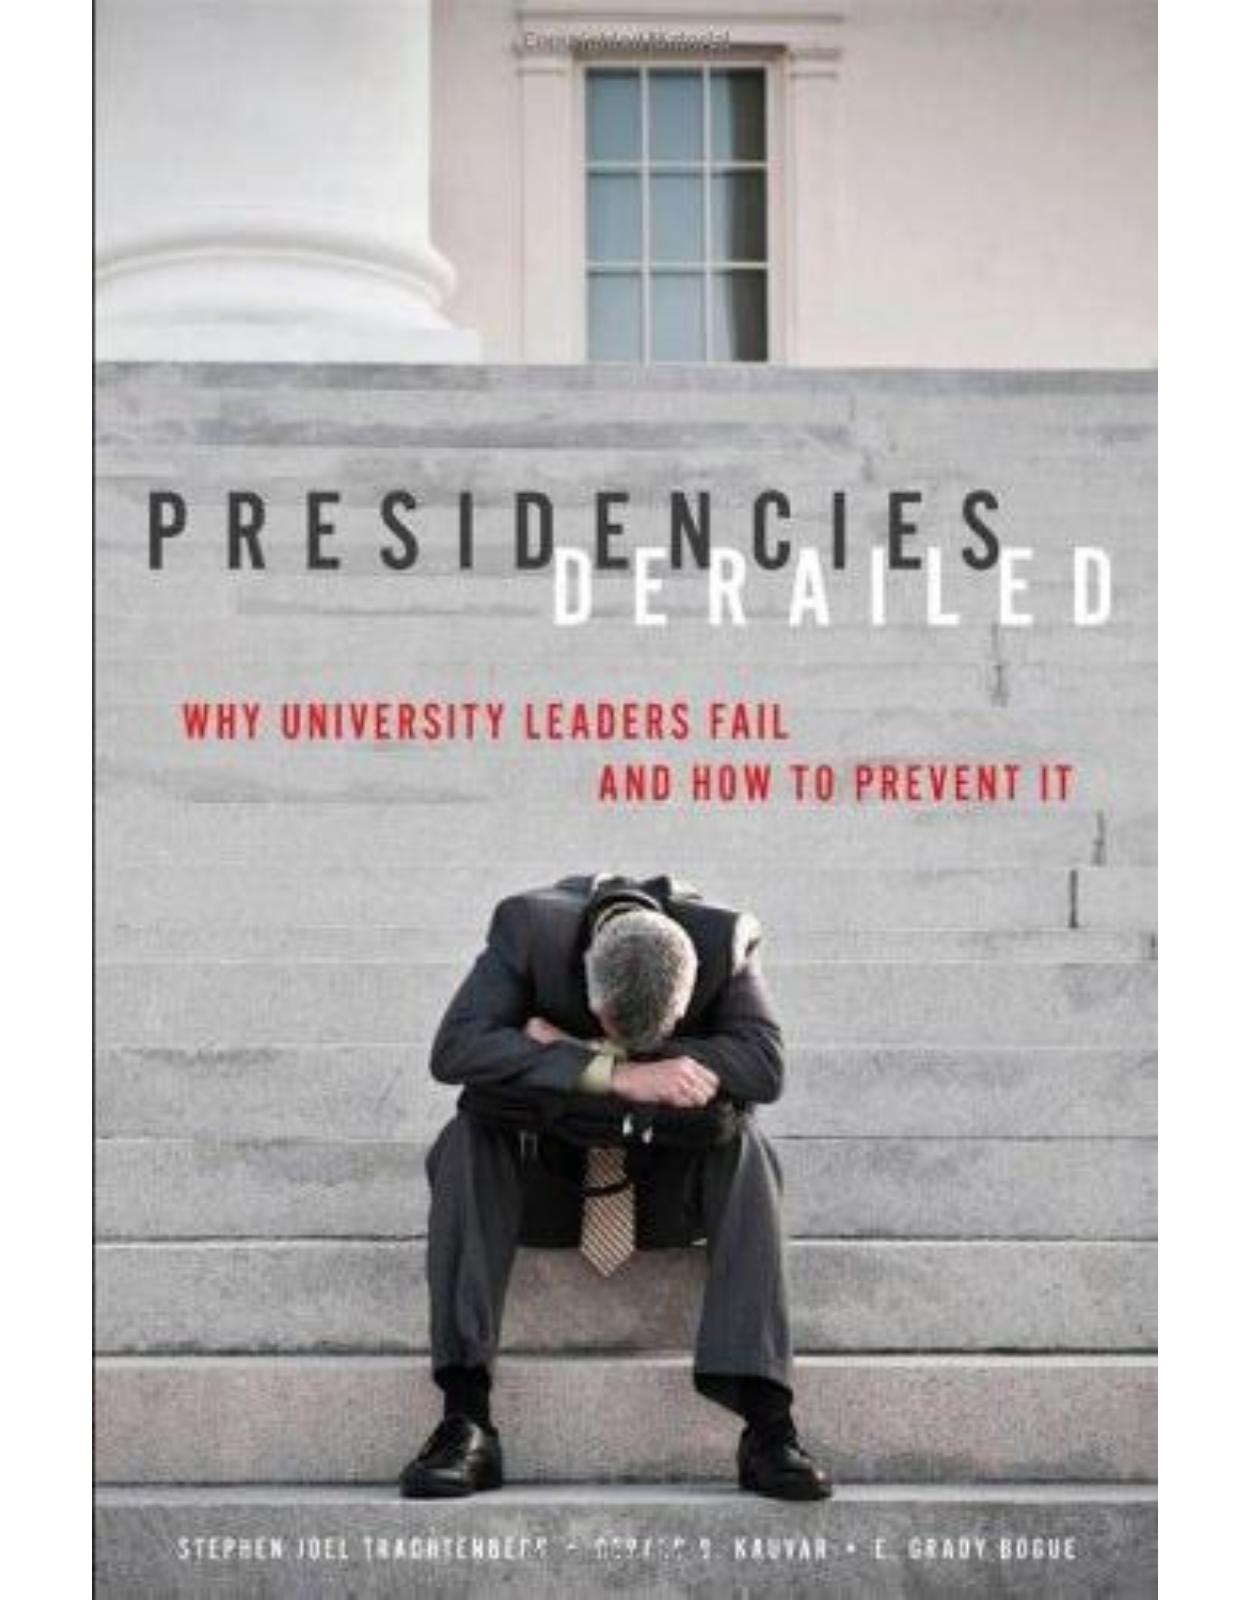 Presidencies Derailed. Why University Leaders Fail and How to Prevent It